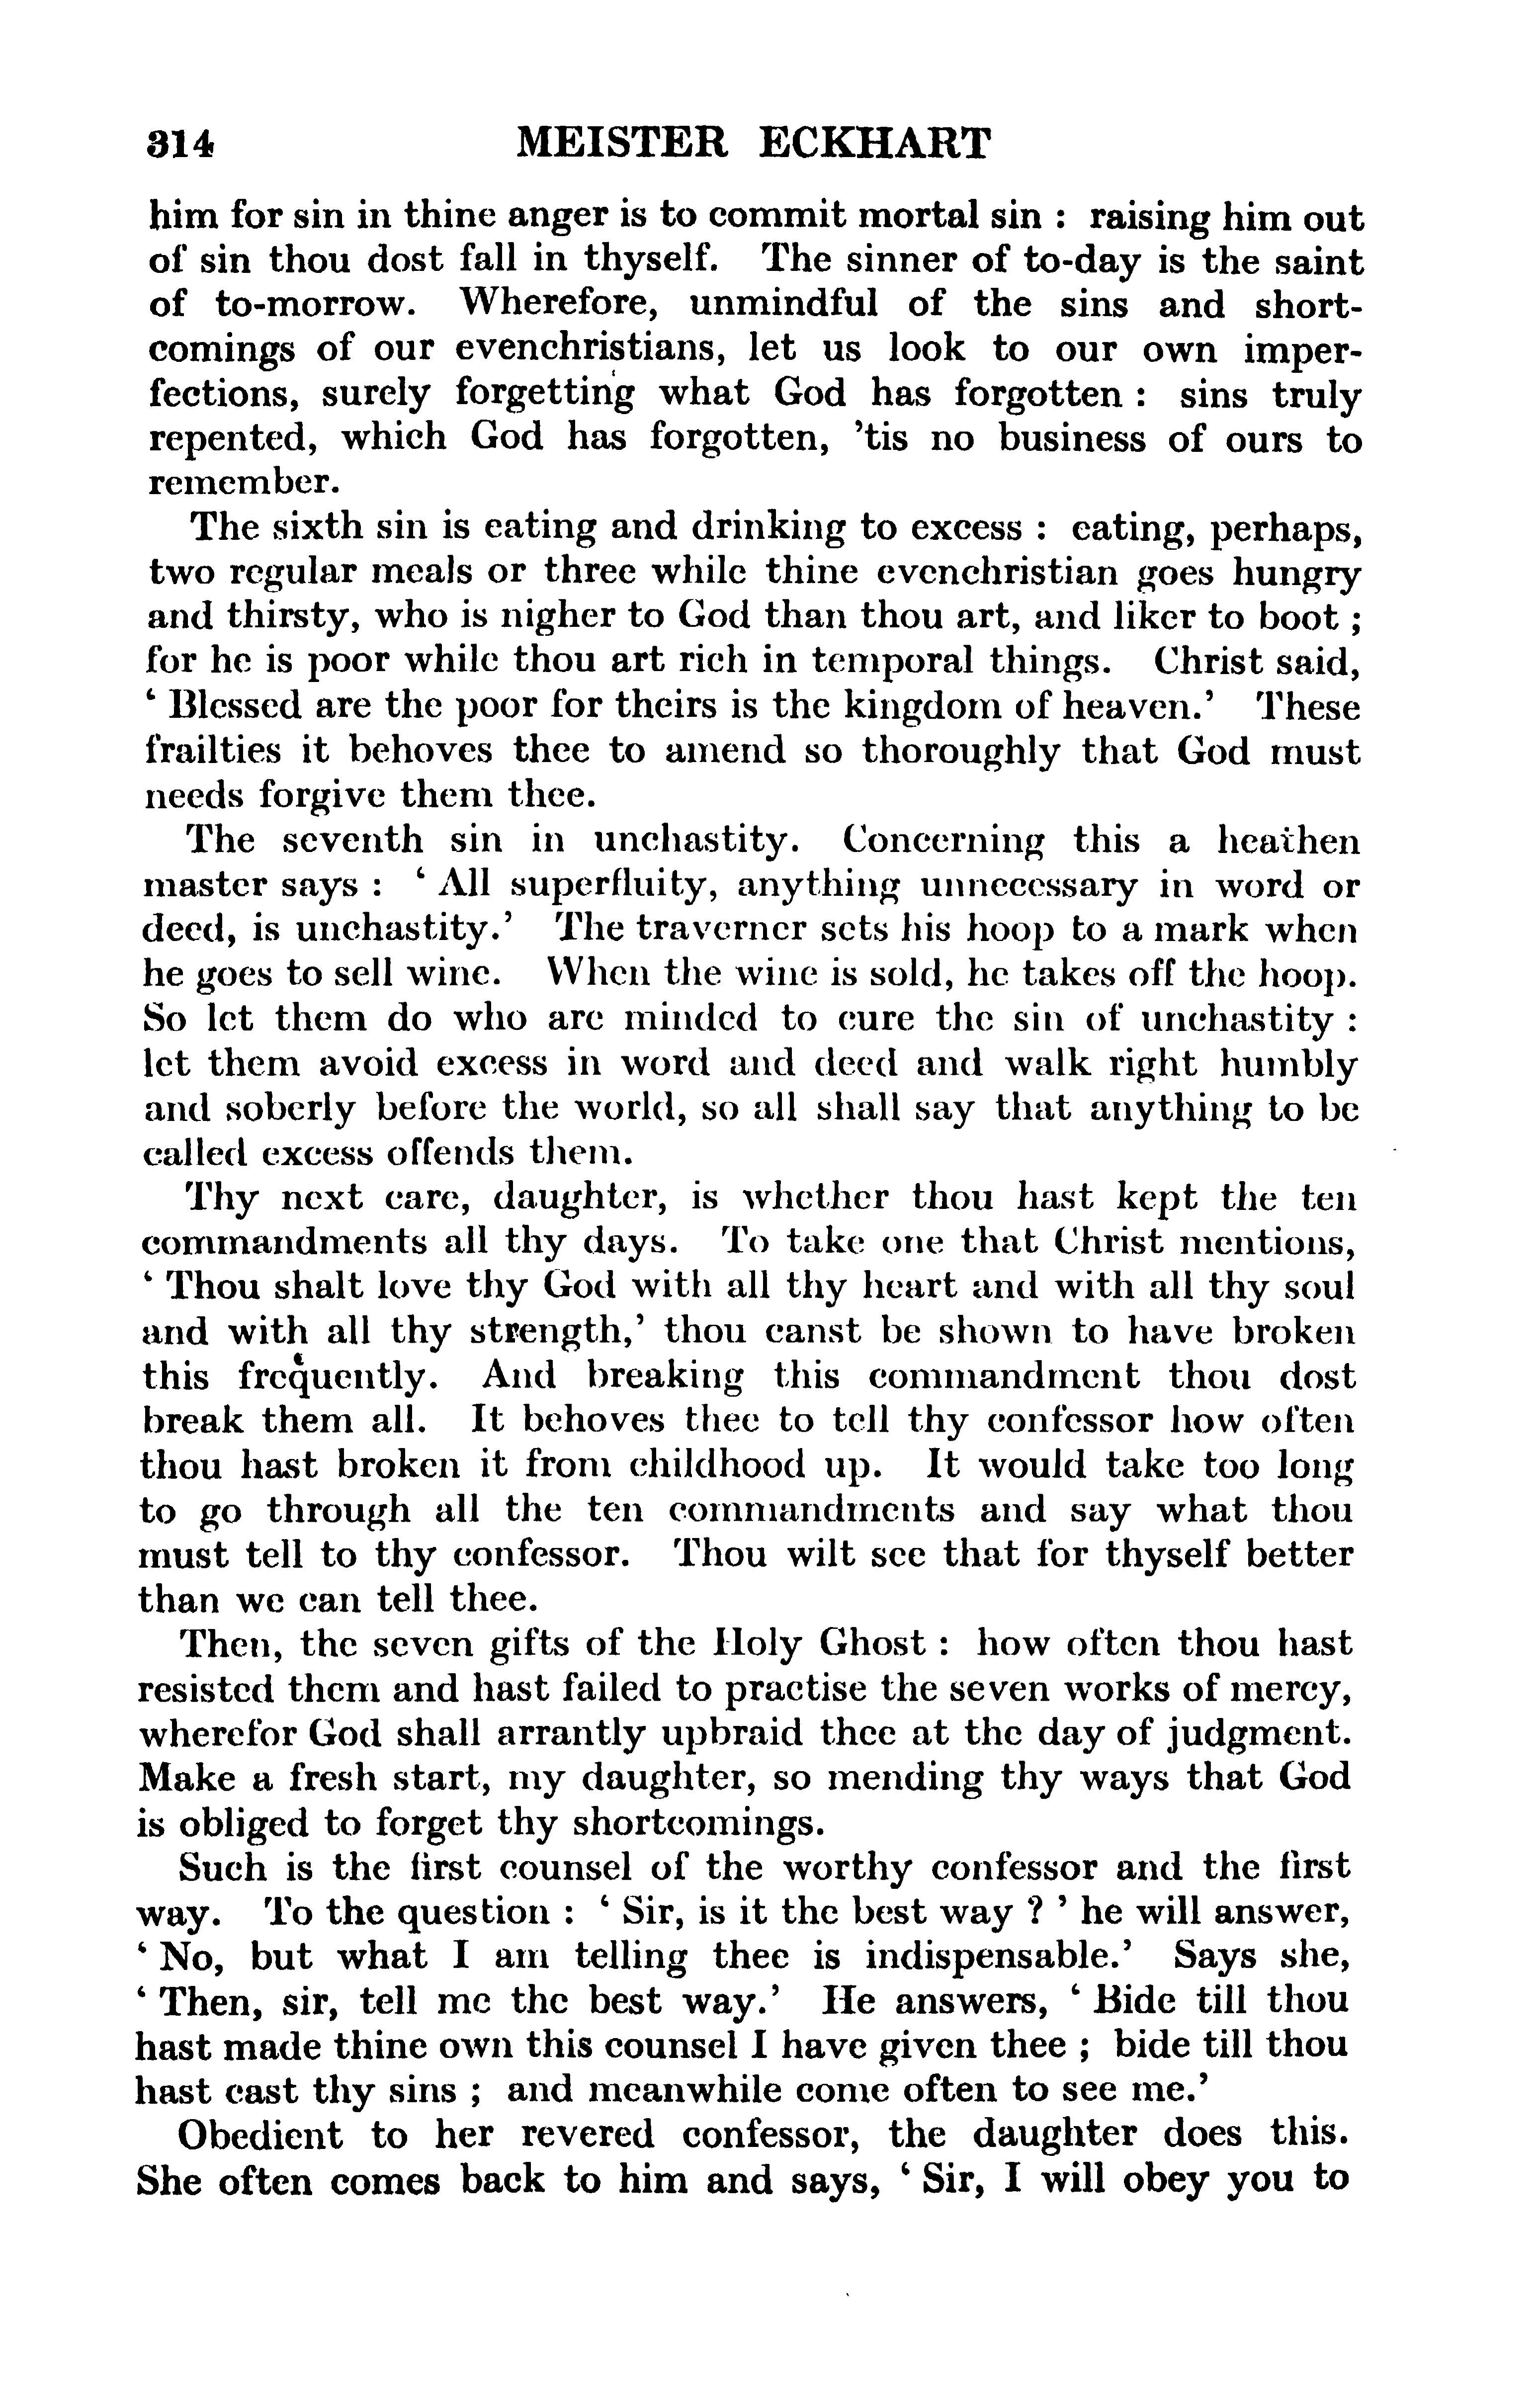 Image of page 0338